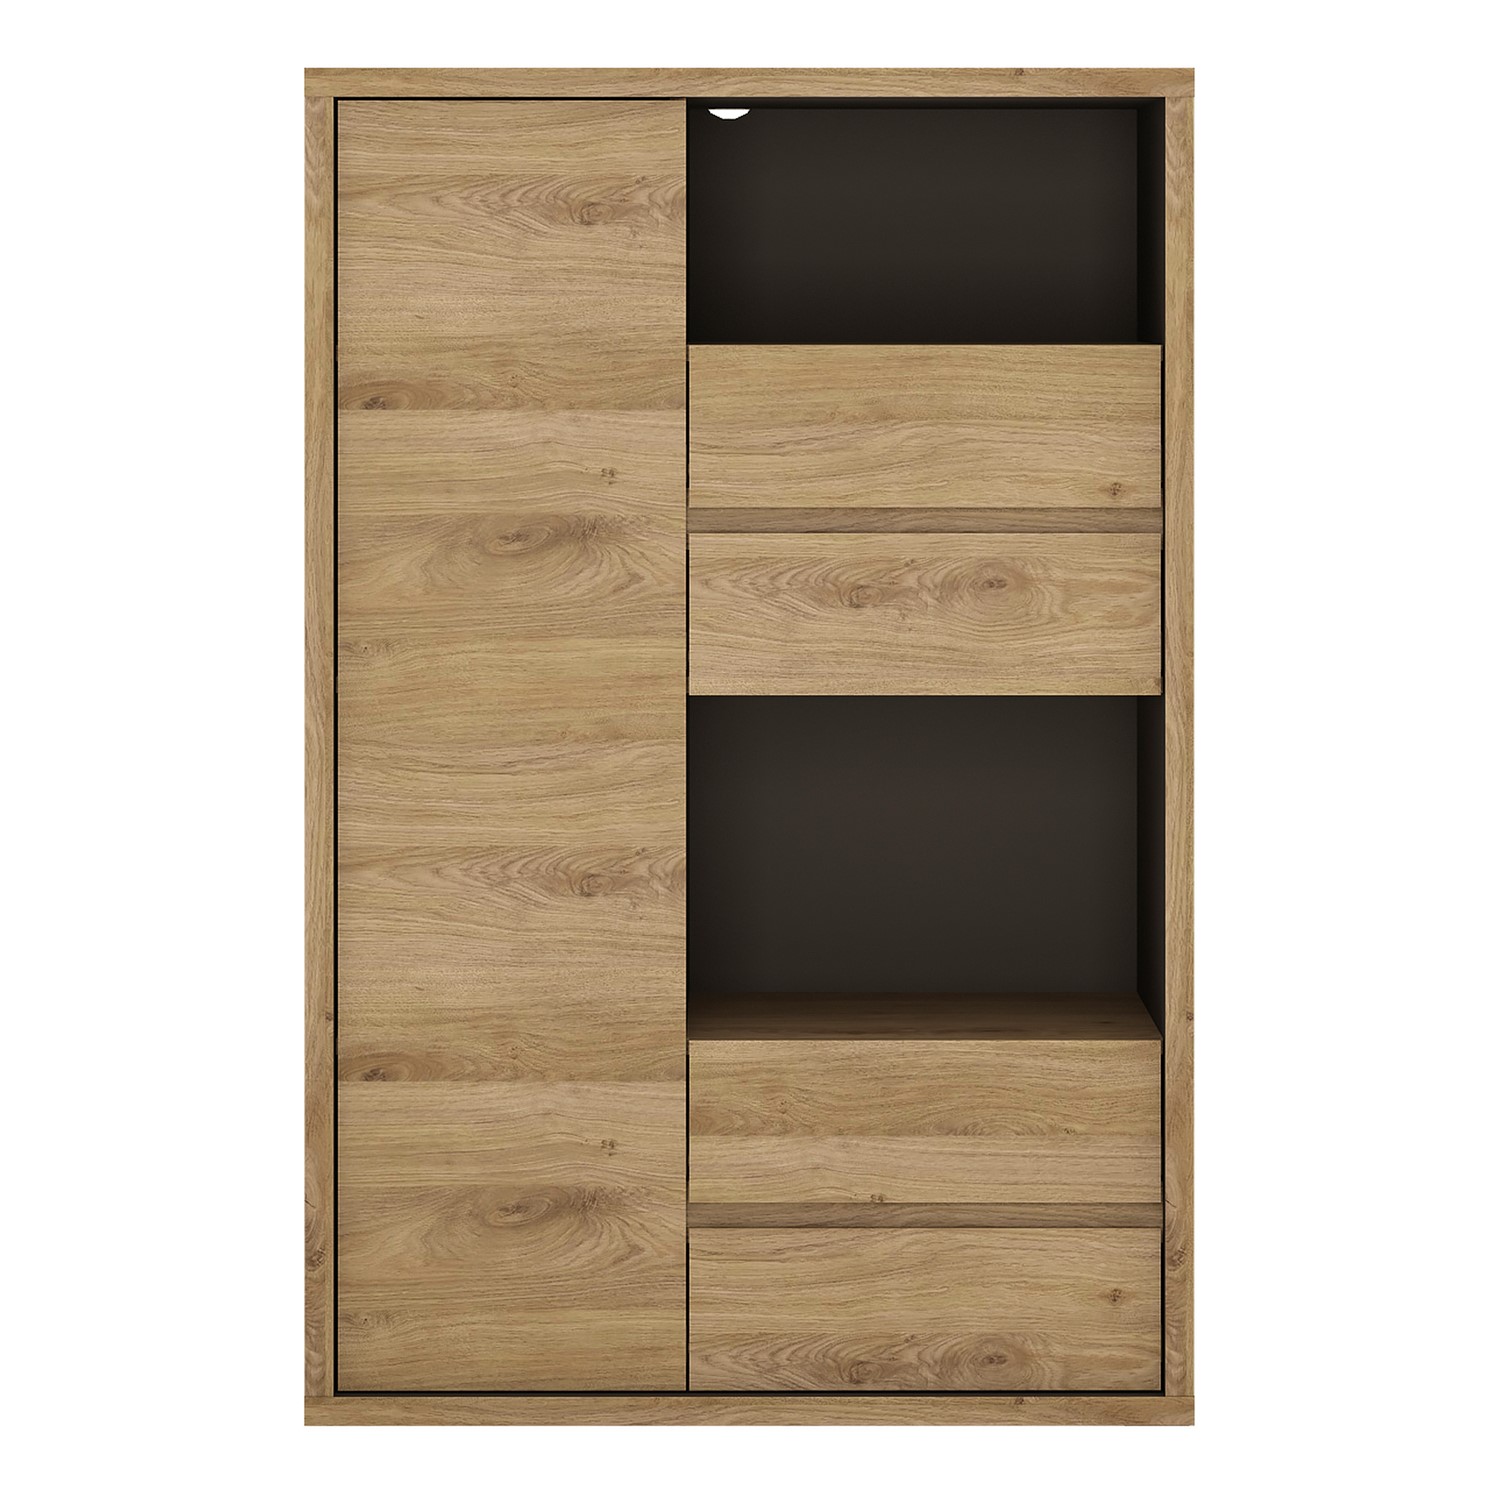 Read more about Wood display cabinet with drawers shetland